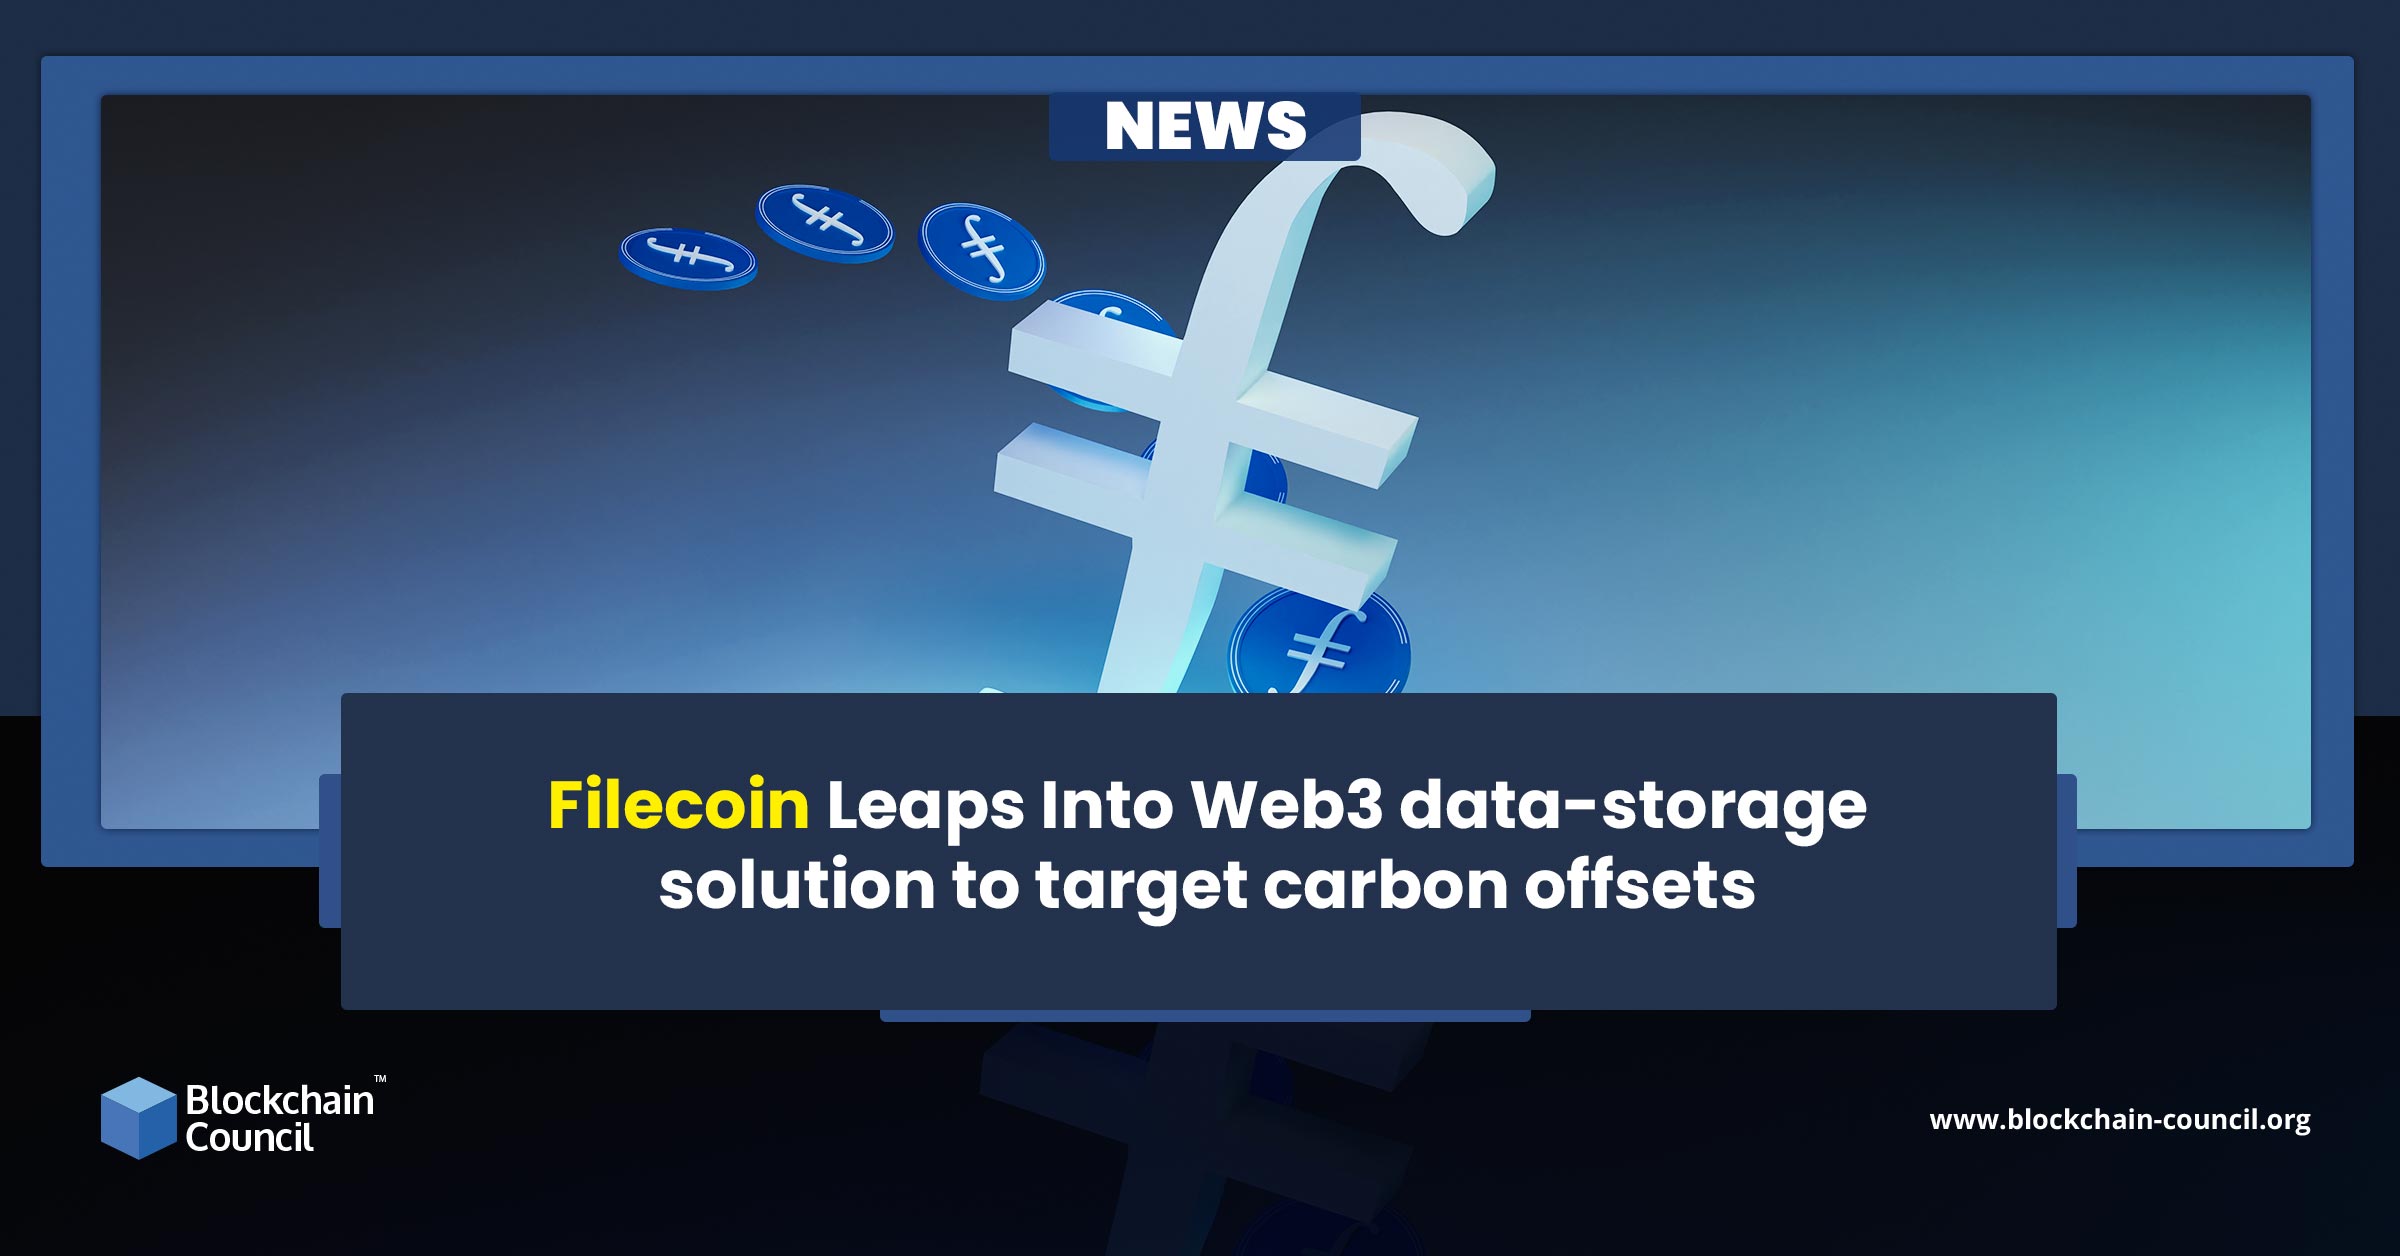 Filecoin Leaps Into Web3 data-storage solution to target carbon offsets